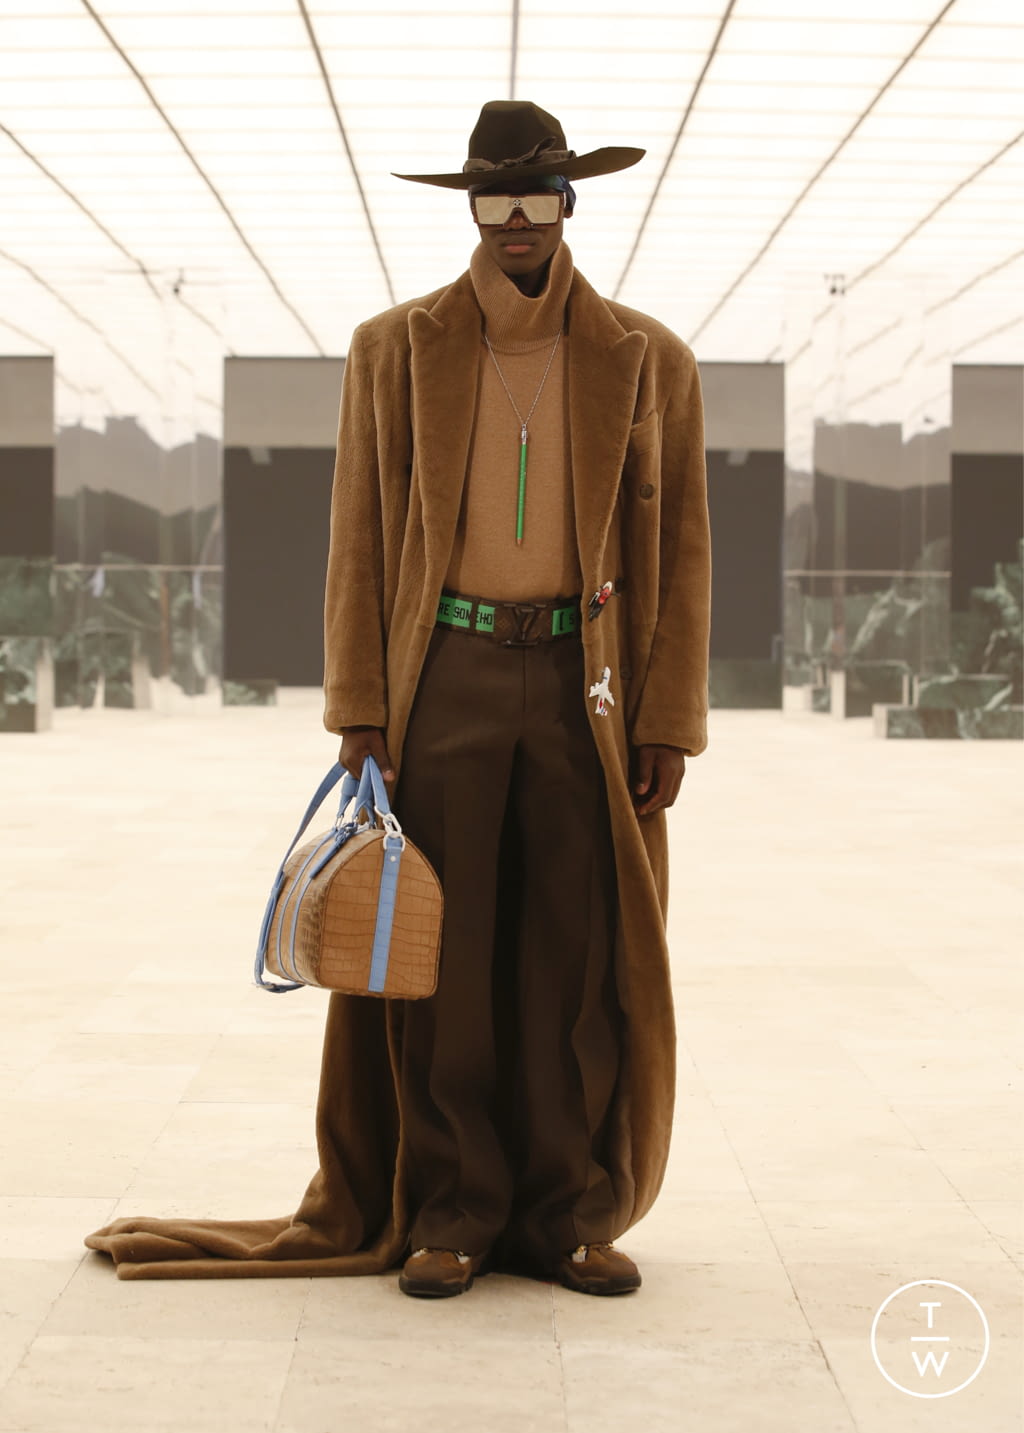 Louis Vuitton's FW21 Collection Challenges the Status Quo - Sharp Magazine